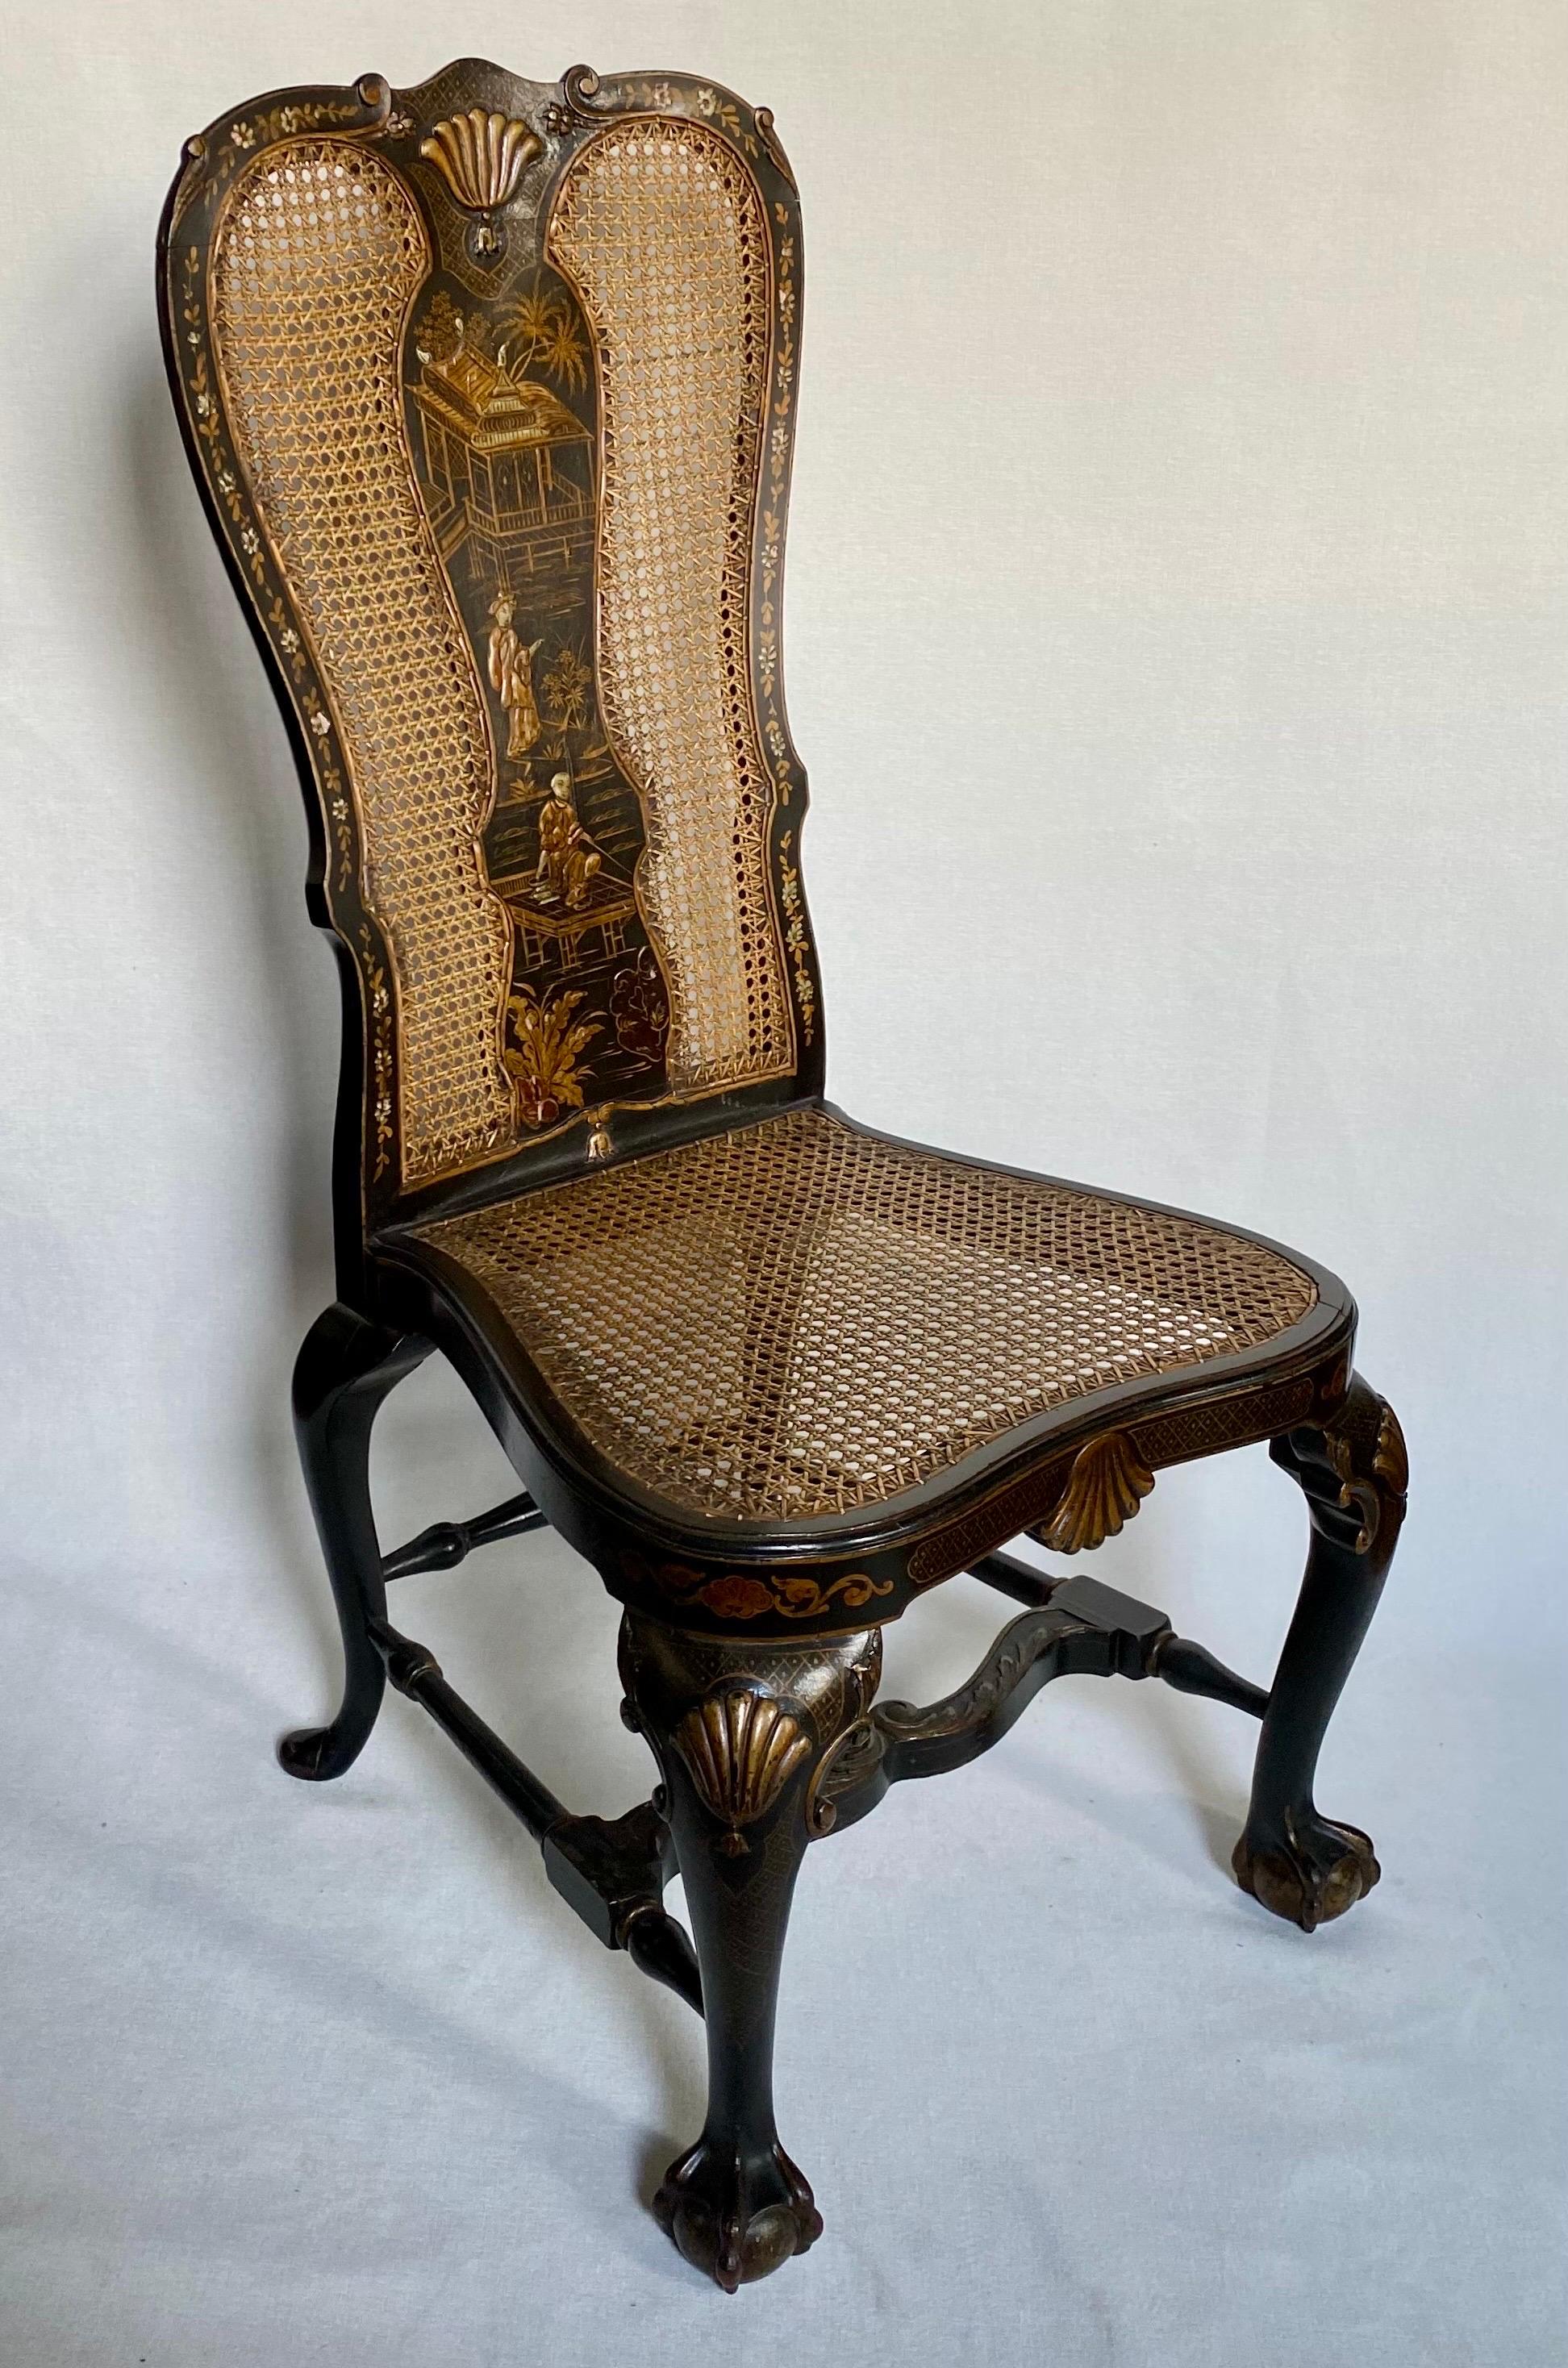 George II Style Chinoiserie Japanned gilt decorated ebonized cane side or desk chair with removable down filled red velvet seat cushion.   Beautifully curved cabriole legs with paw ball & claw feet.  Late 19th Century 